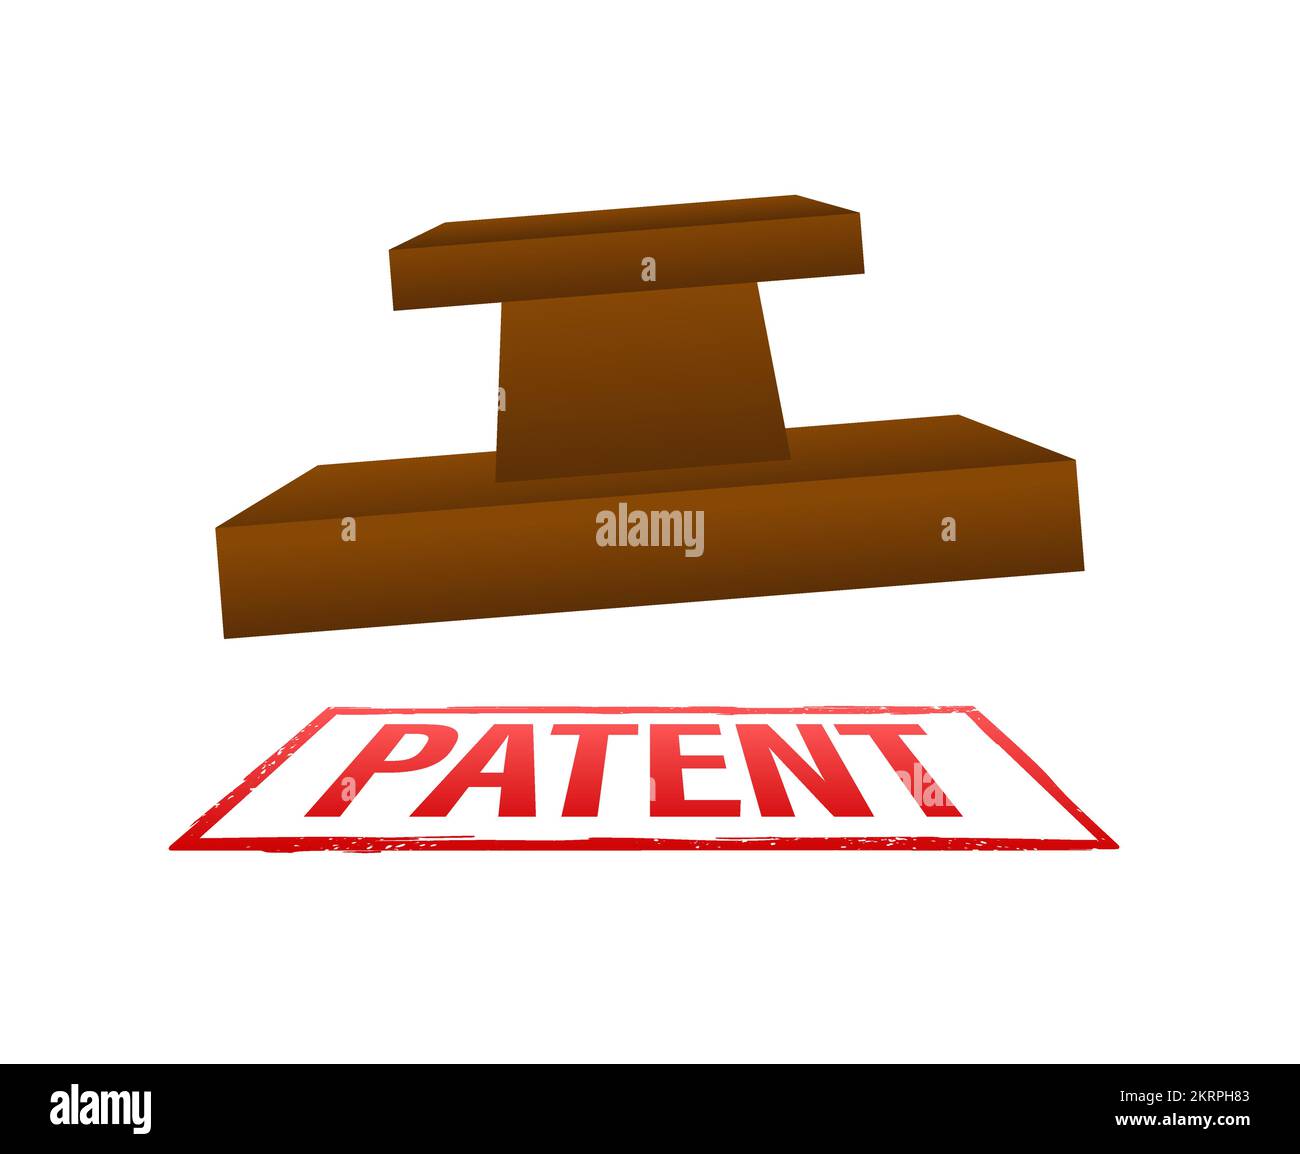 Patented red Stamp. Patented grunge sign, label. Vector stock illustration Stock Vector